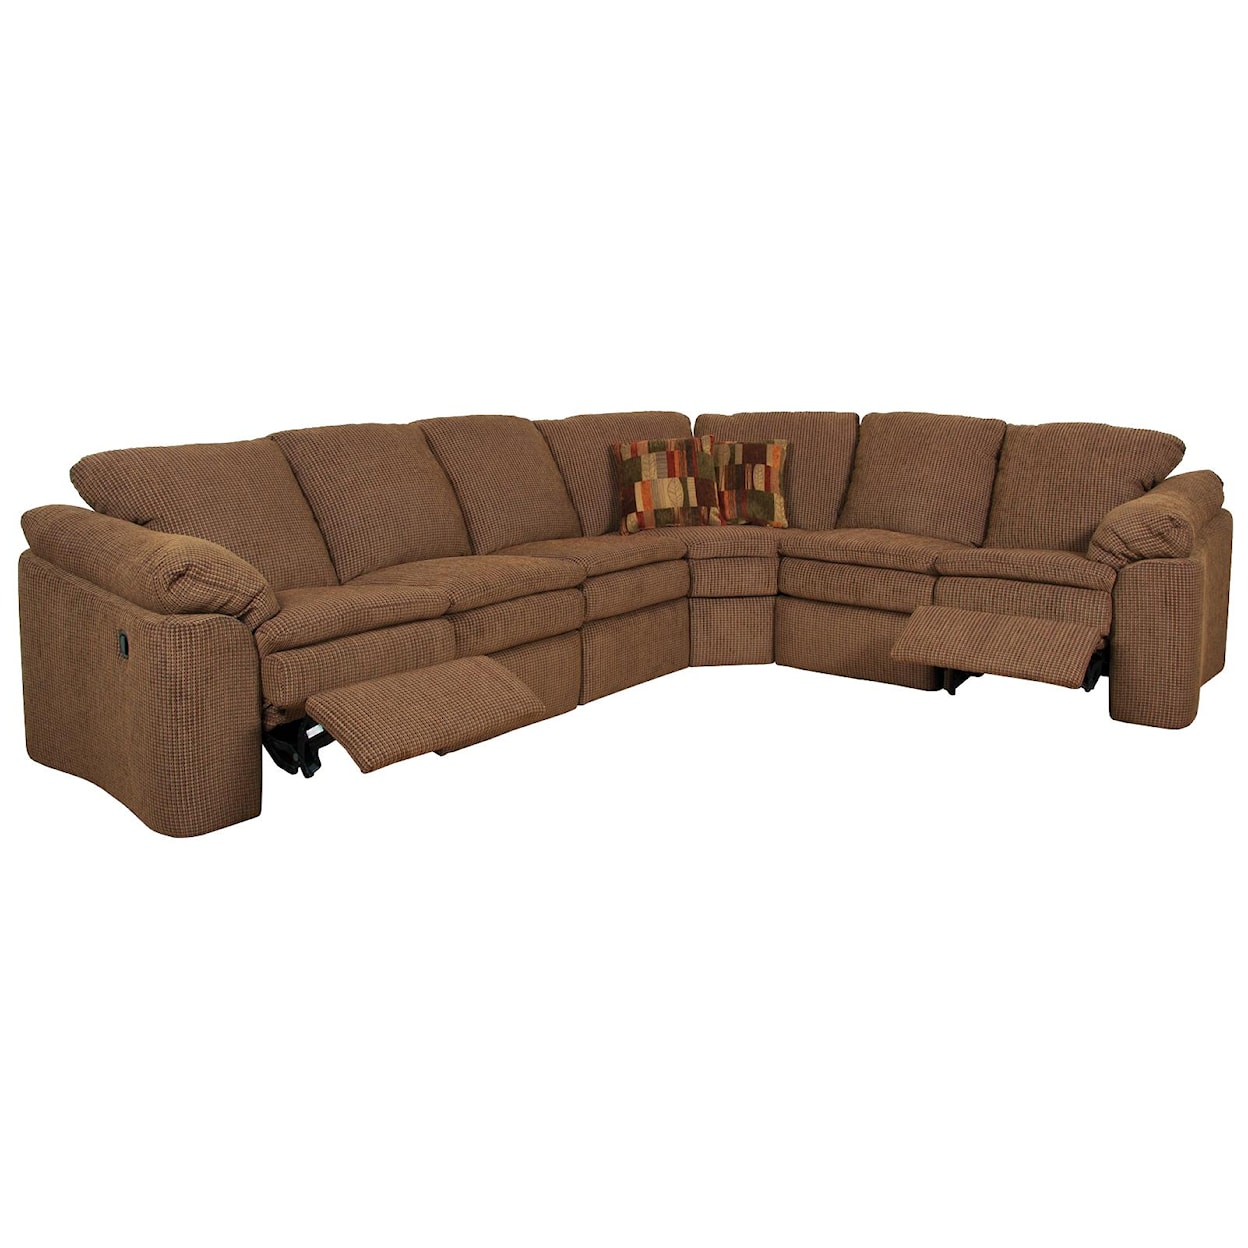 England 7300/L Series Six Person Reclining Sectional Sofa